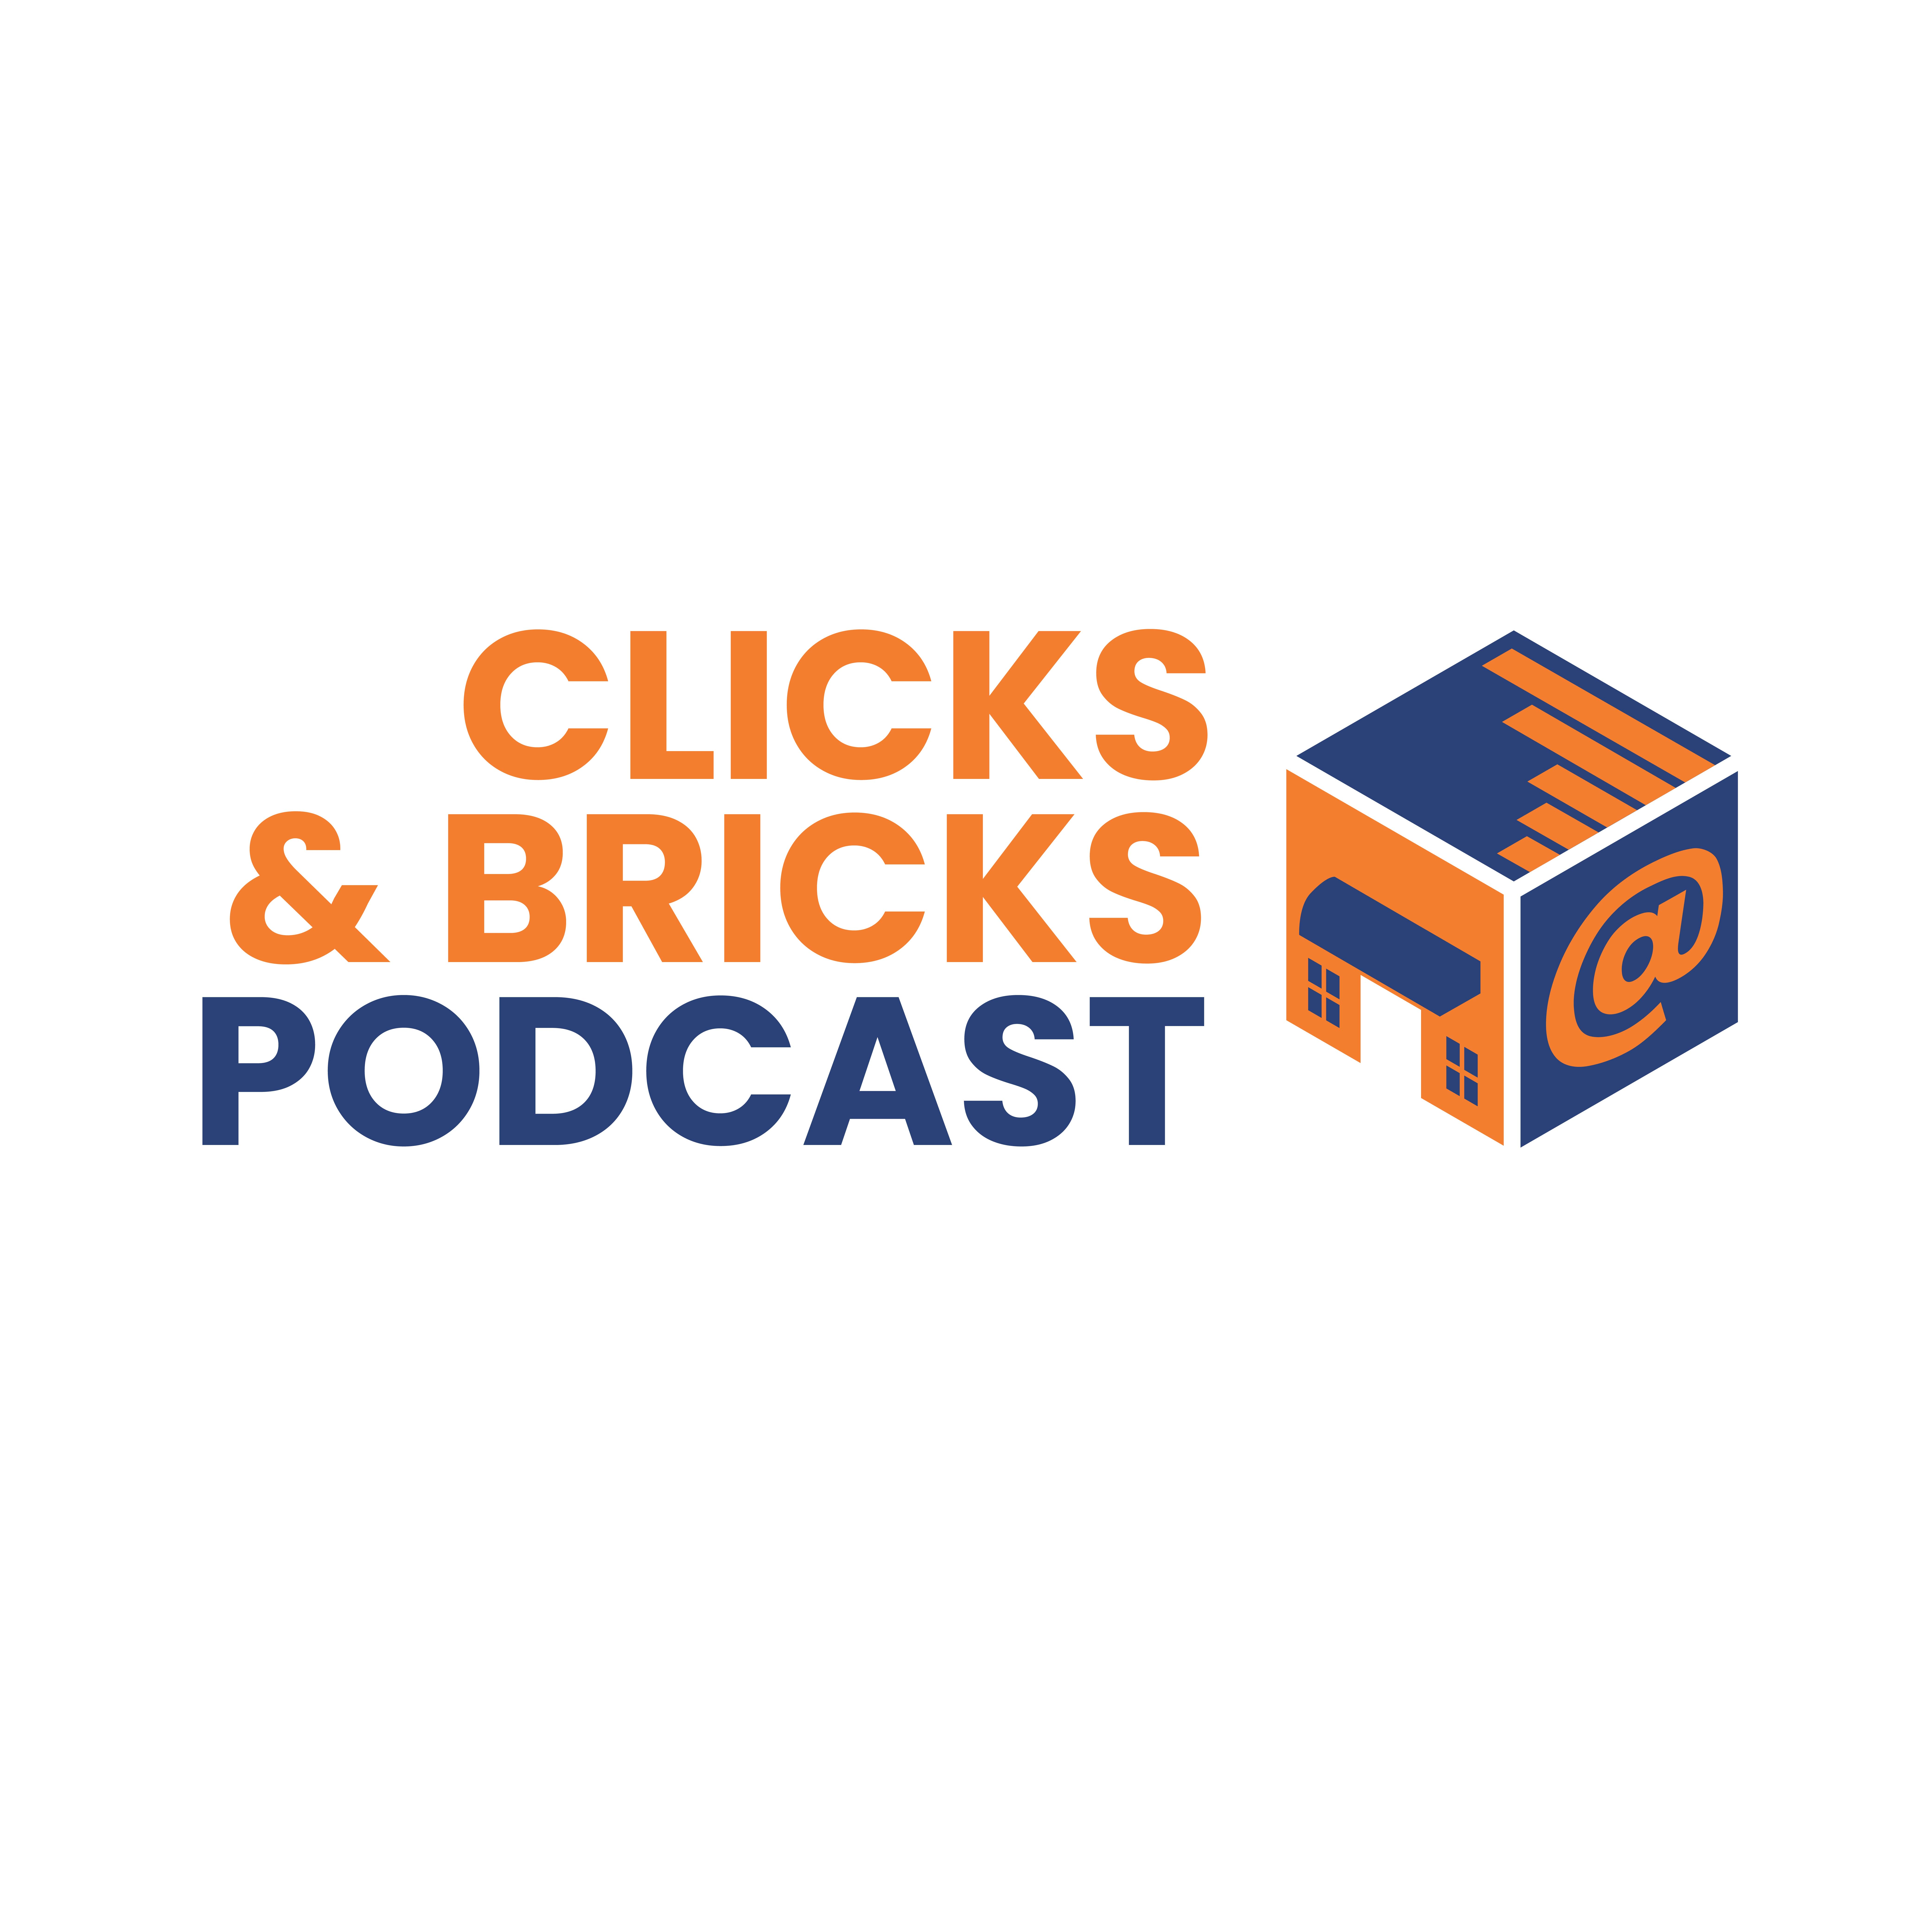 Clicks and Bricks Announces Interview with Leni Rivera, Founder of Workplace Experience